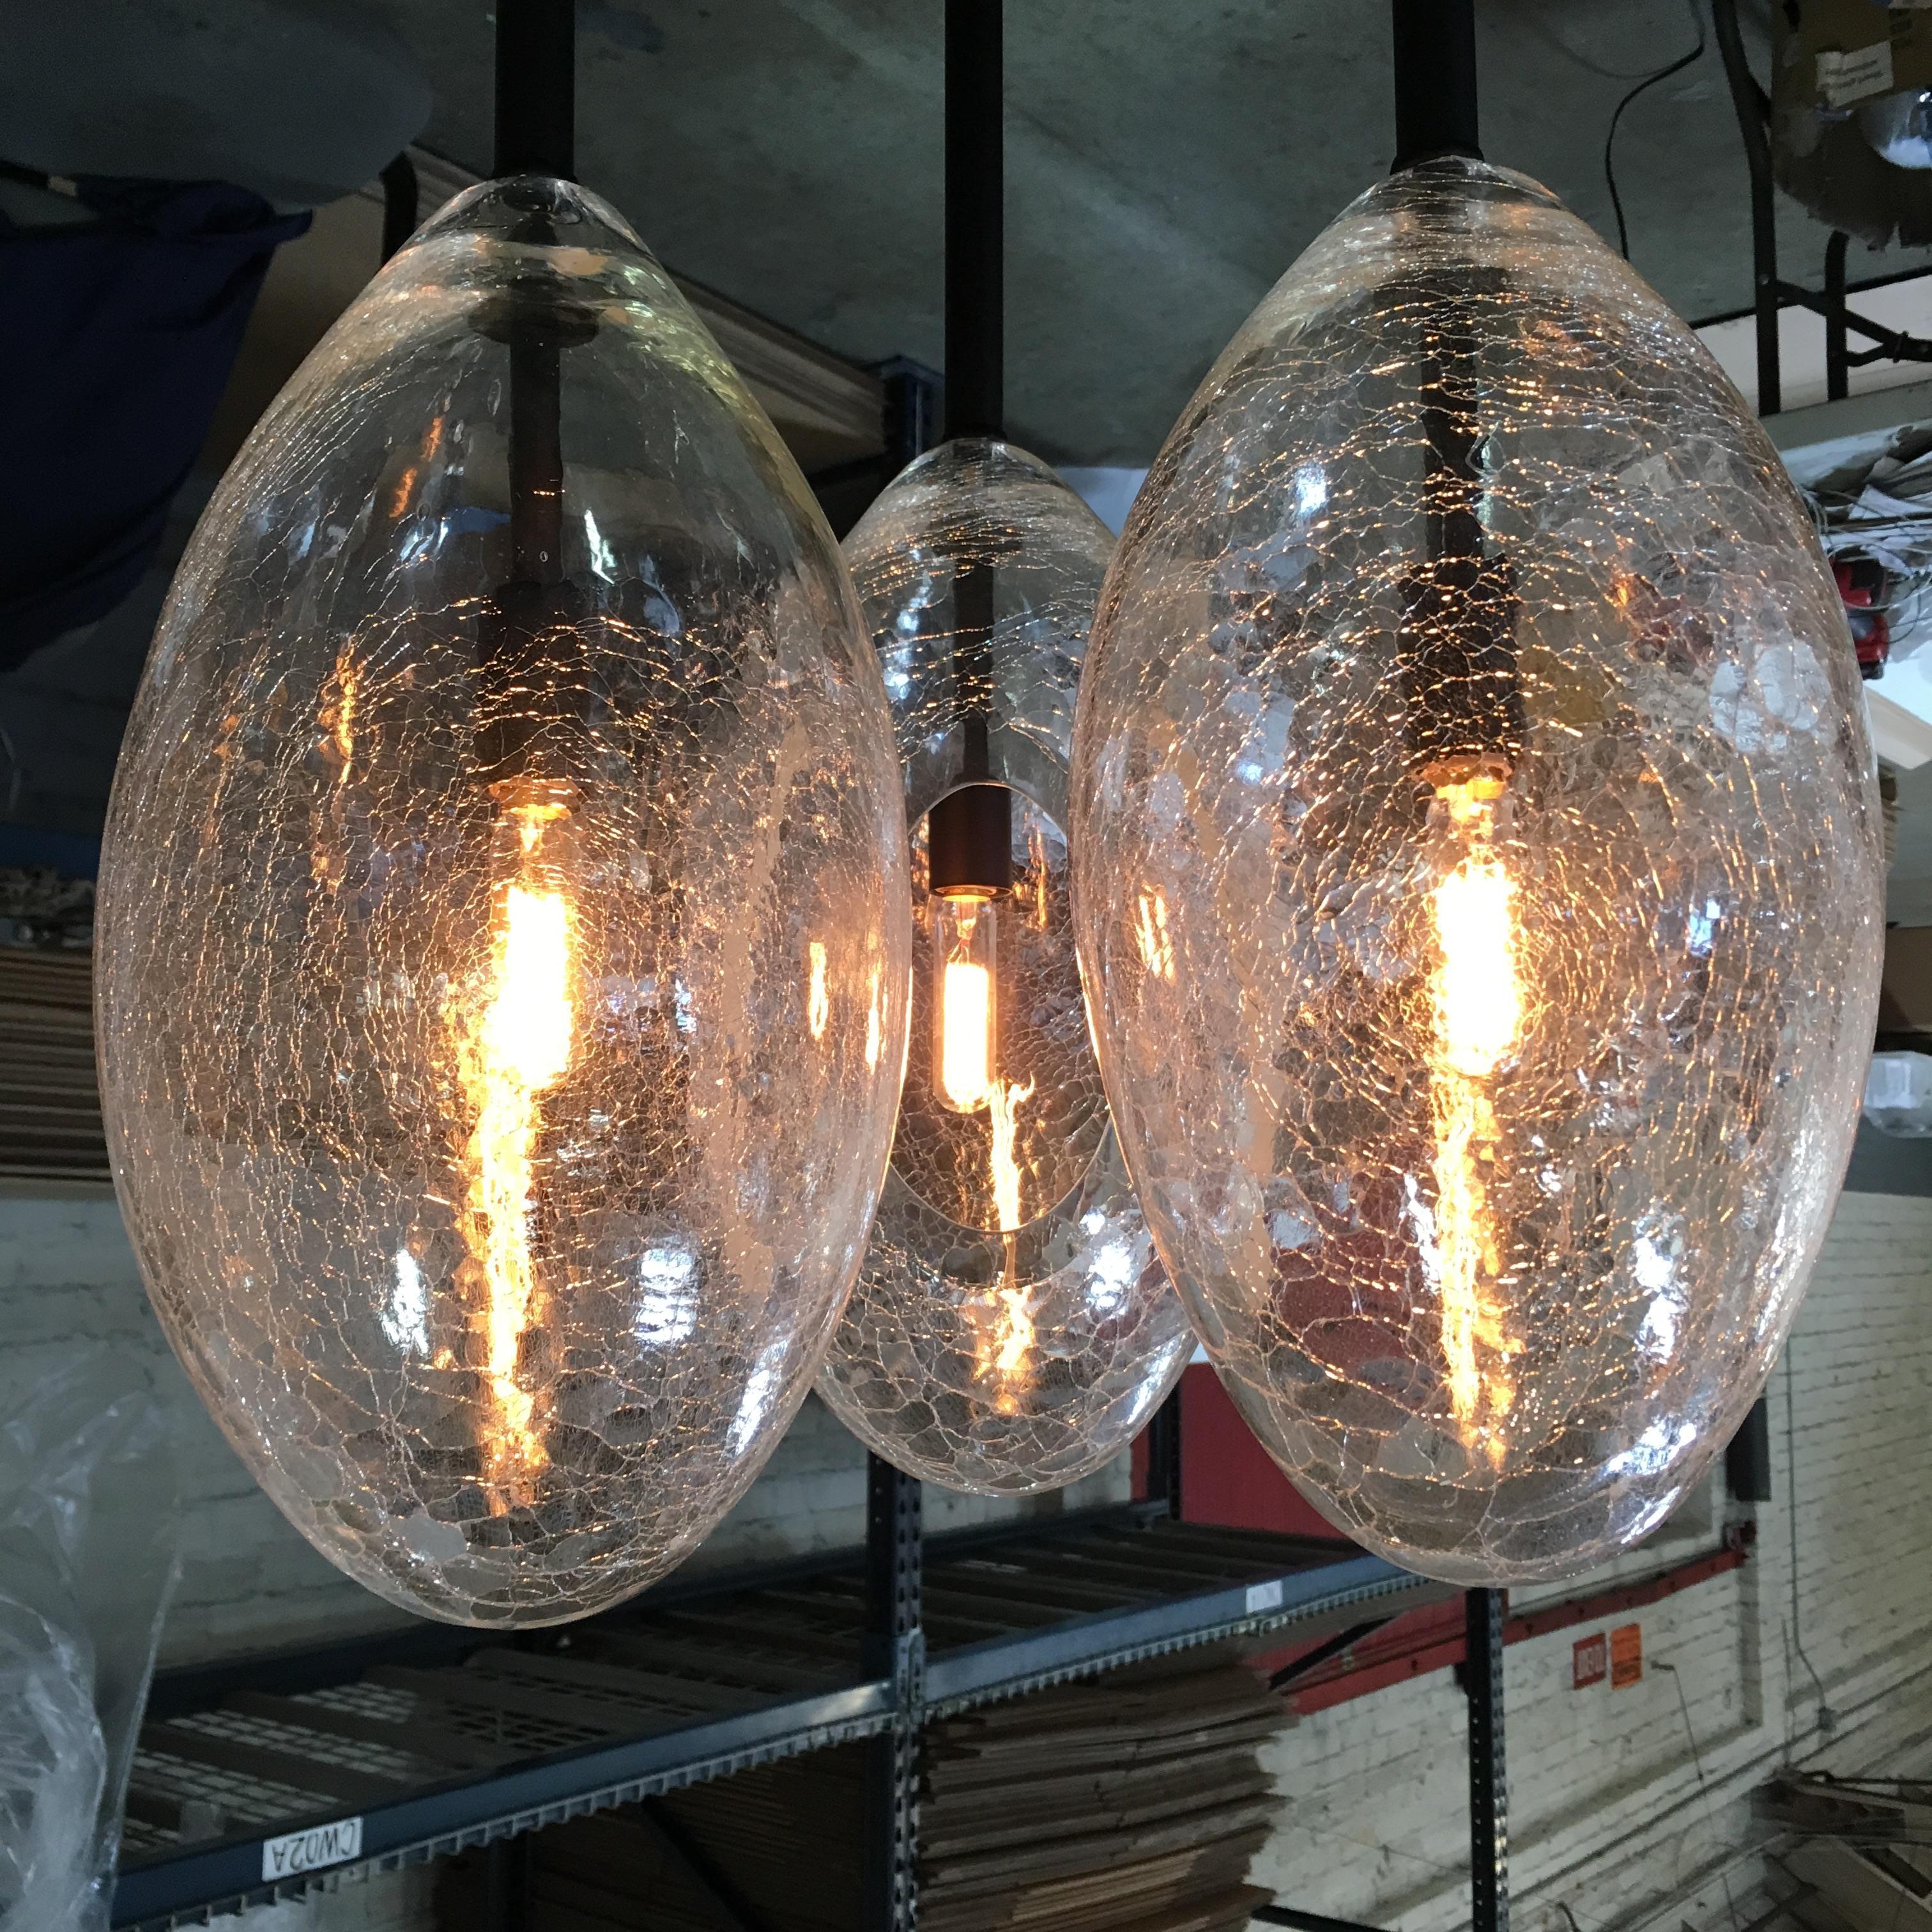 Overscale hand-blown crackle glass 'eggs' sparkle and refract light. A striking solo note or a cascade of shape and light, Ovovo is sensuous with a touch of 60's whimsy.

Flash-cracked and fire-blown glass with polished brass or nickel.

Models in